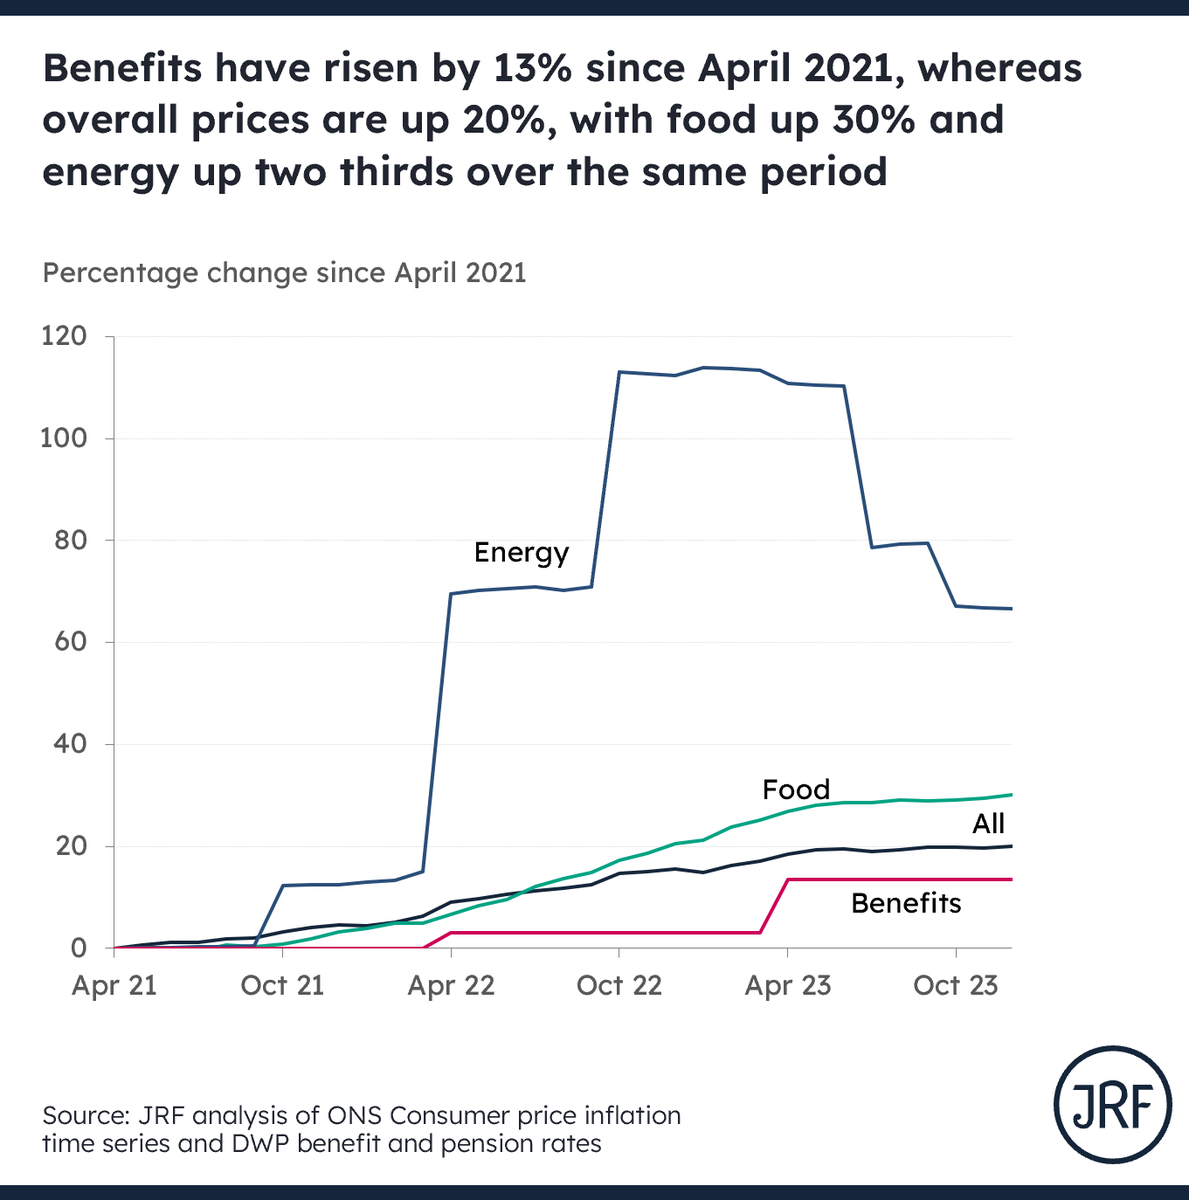 Here's a chart comparing benefit rates, which have risen by 13% since April 2021, with overall prices (up 20%), food (up 30%) & energy (up two thirds since April 2021 and 80% since Dec 2020.) Remember this is just the rate of change in amounts that were inadequate to start with.